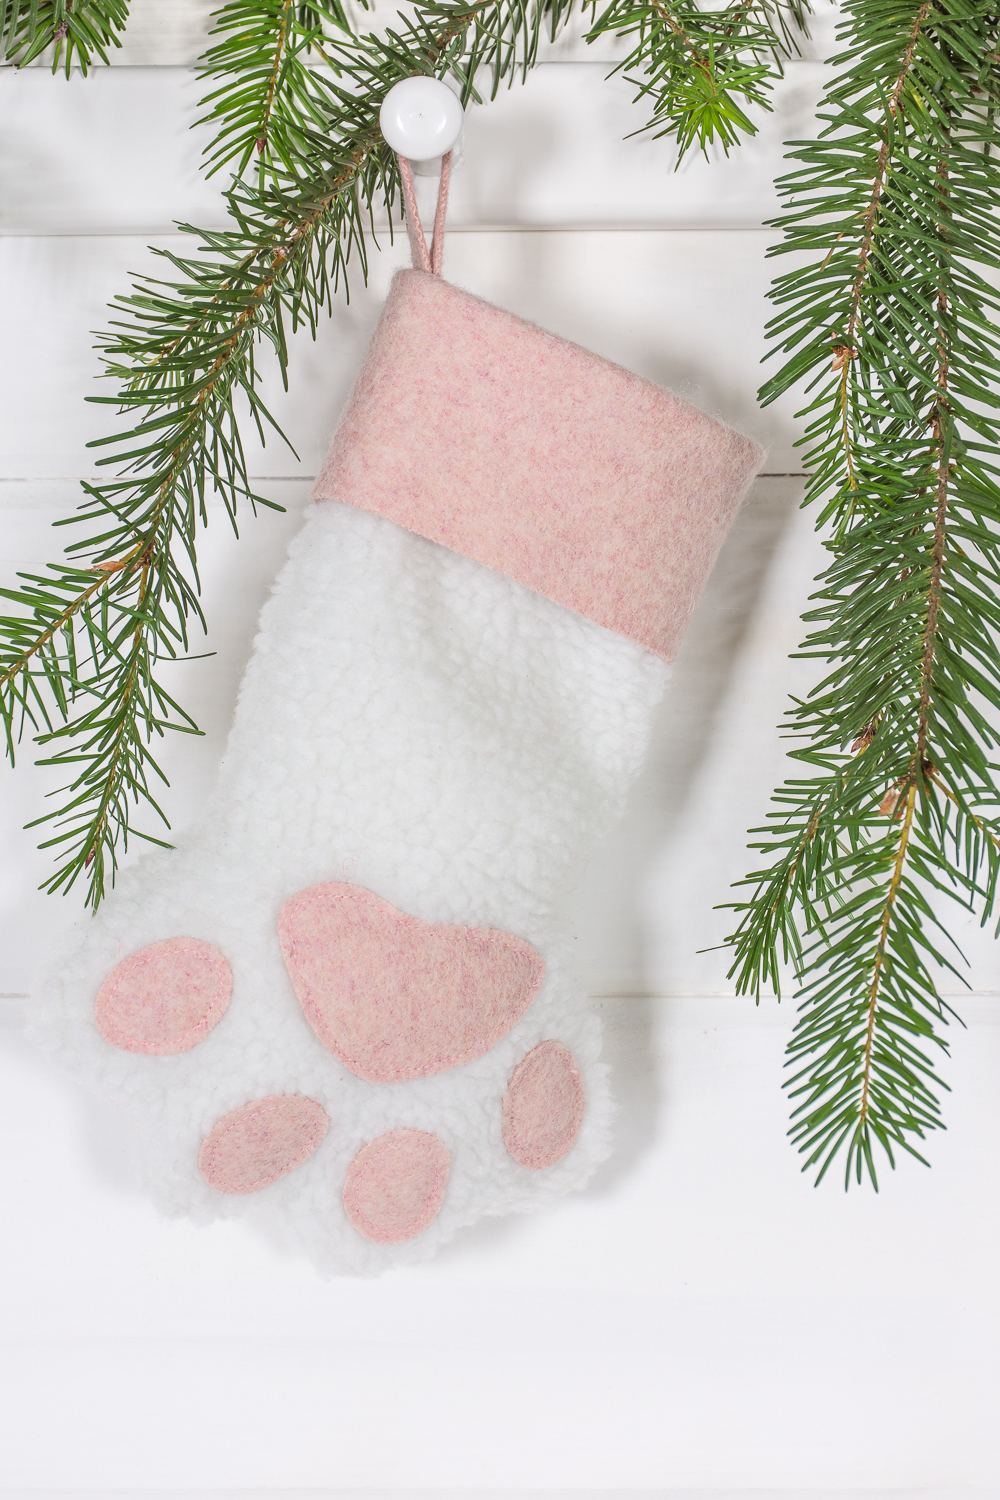 Sew your own pet Christmas stocking